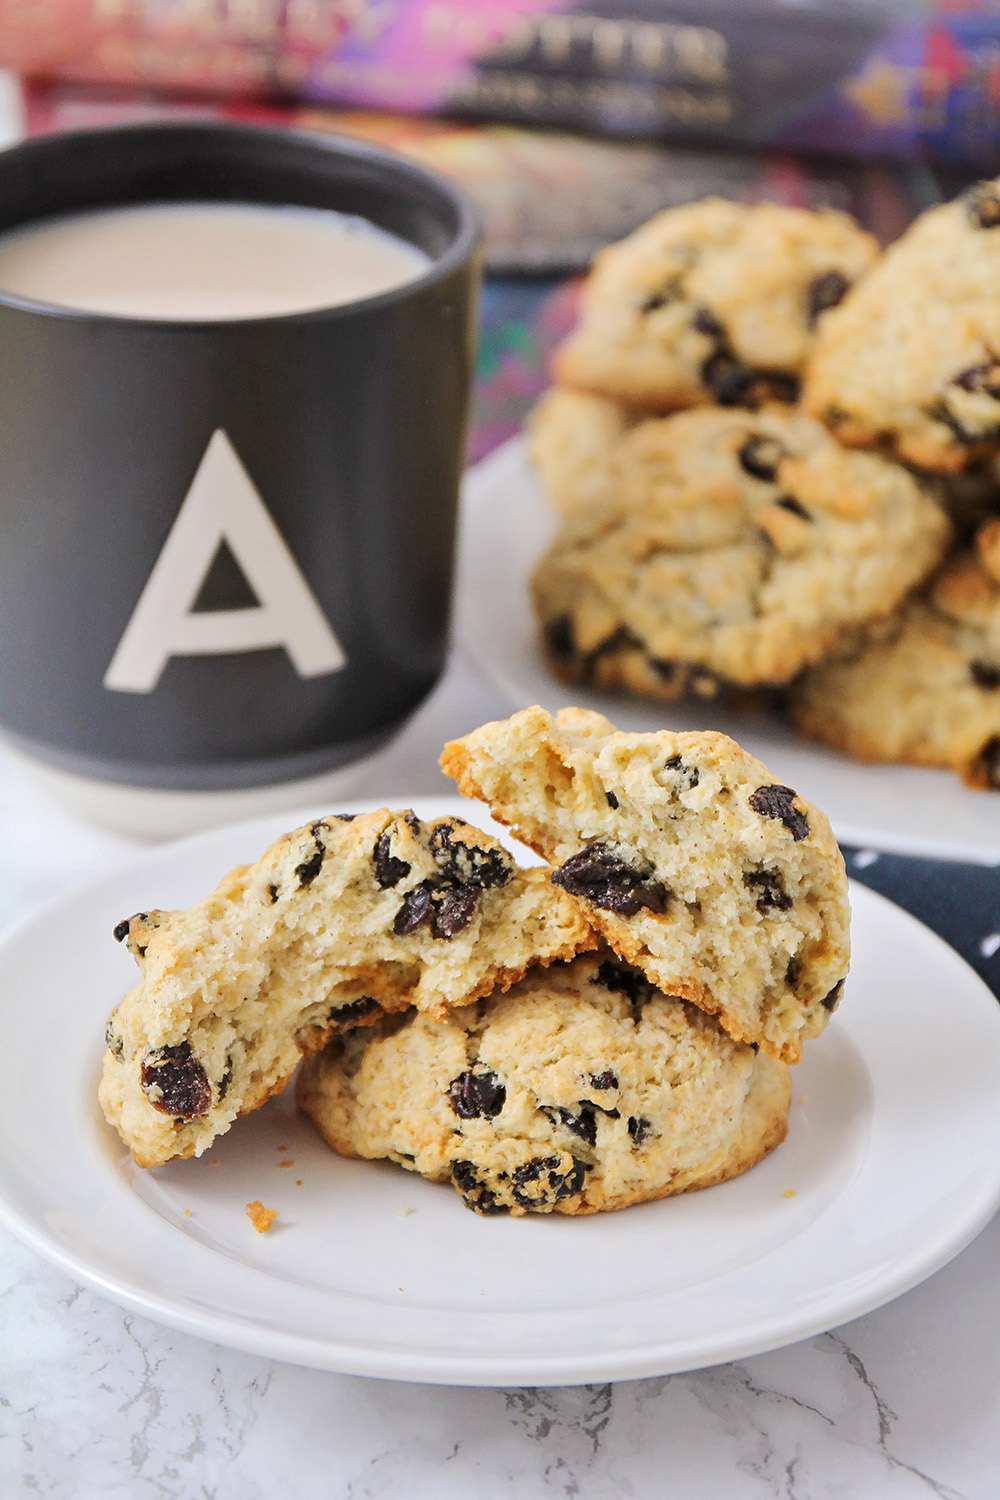 These Harry Potter-inspired rock cakes are so tender and perfectly sweetened. They're perfect for breakfast, or enjoying with a cup of tea!